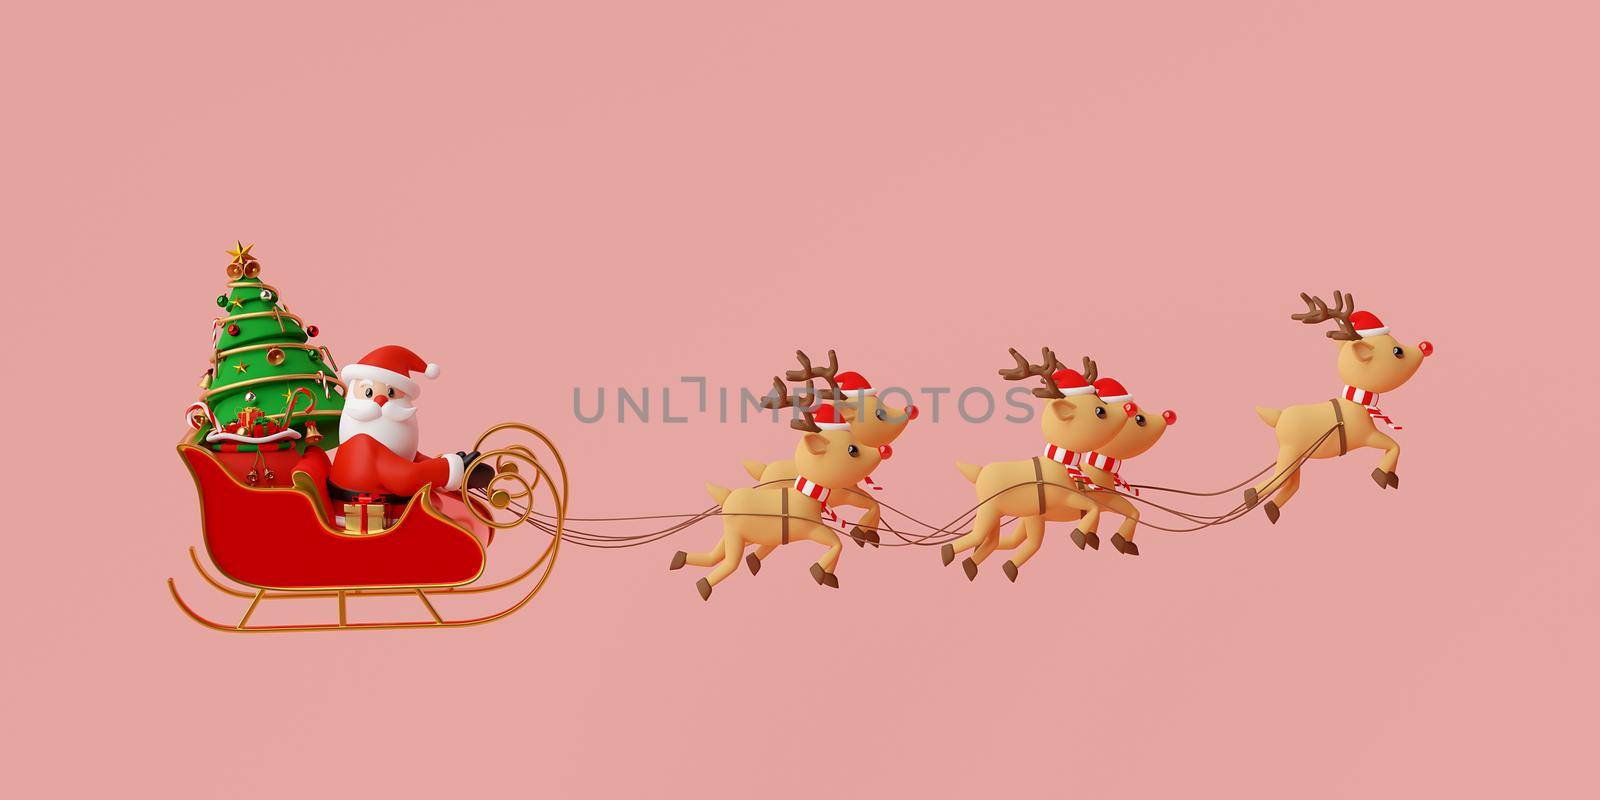 Merry Christmas and Happy New Year, Santa Claus on a sleigh full of Christmas gifts and pulled by reindeer, 3d rendering by nutzchotwarut